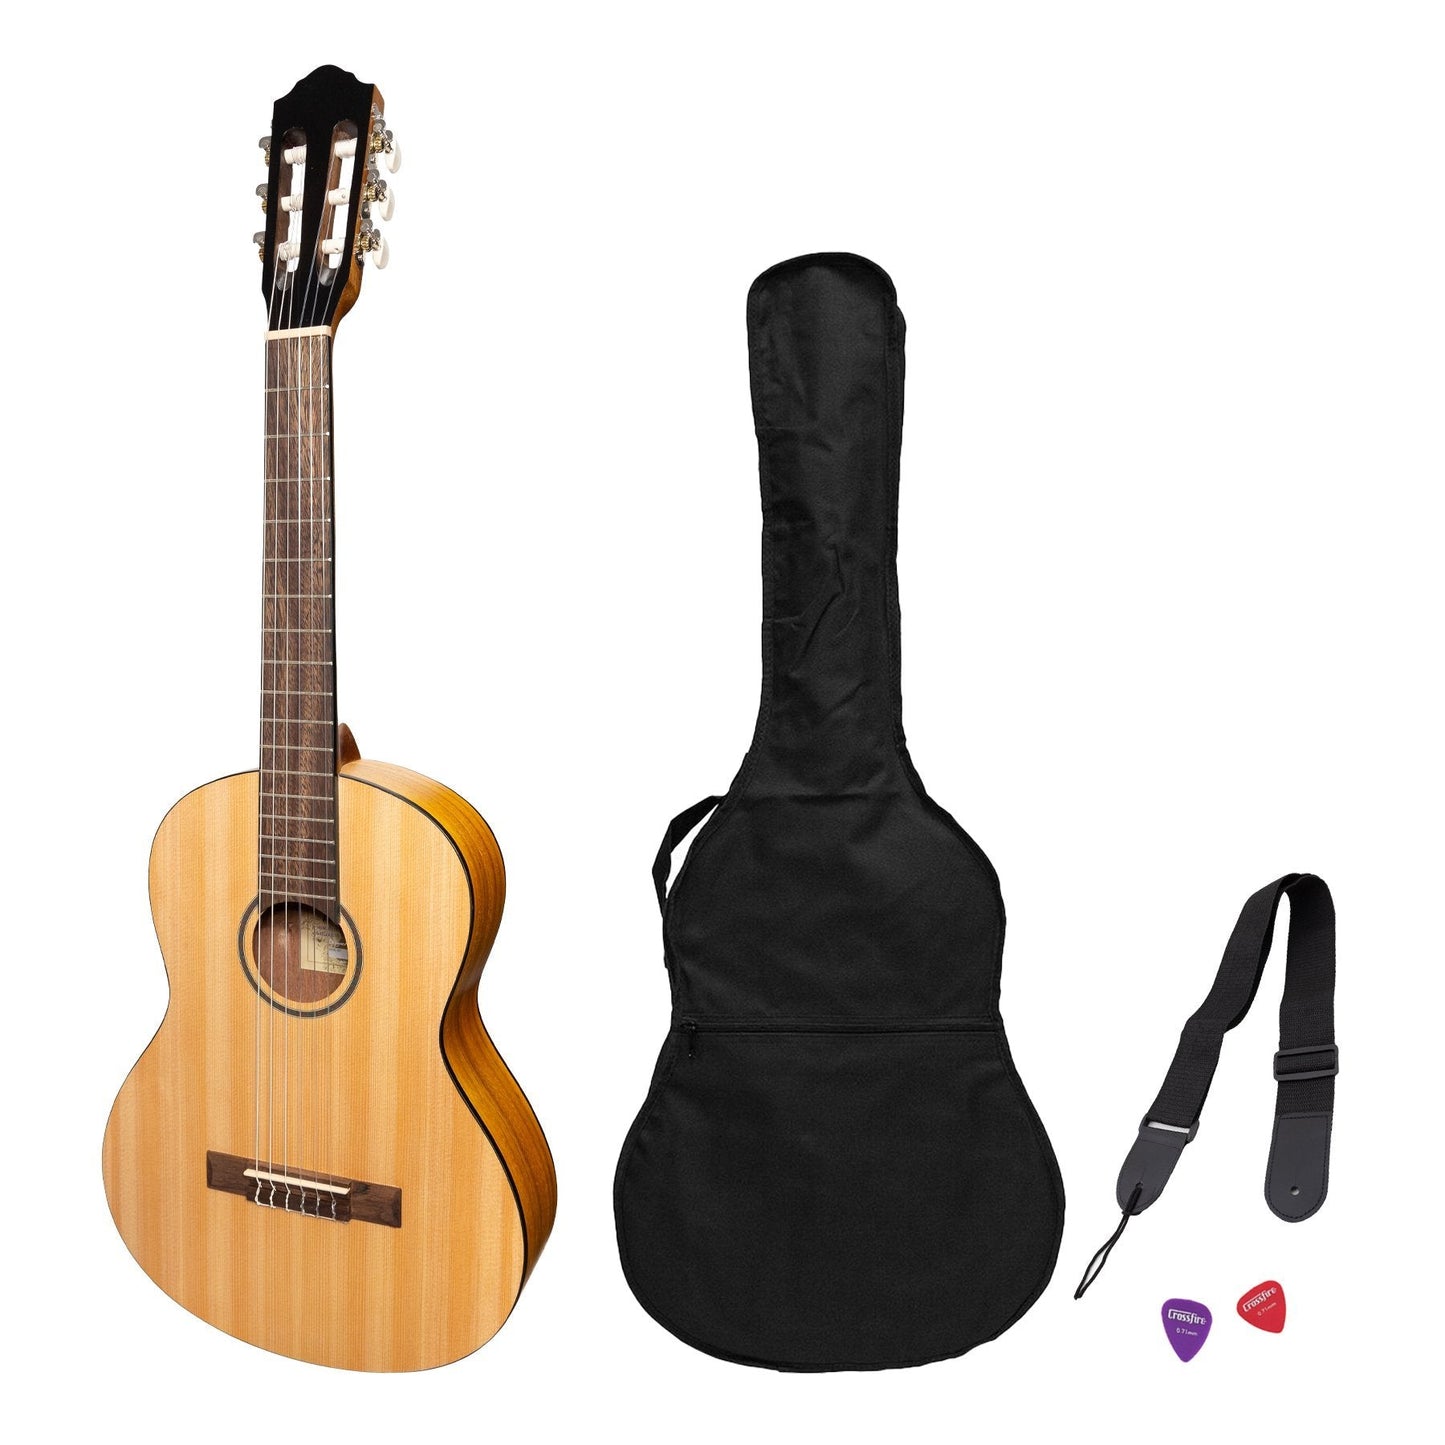 Martinez 3/4 Size Student Classical Guitar Pack with Built In Tuner (Spruce/Koa)